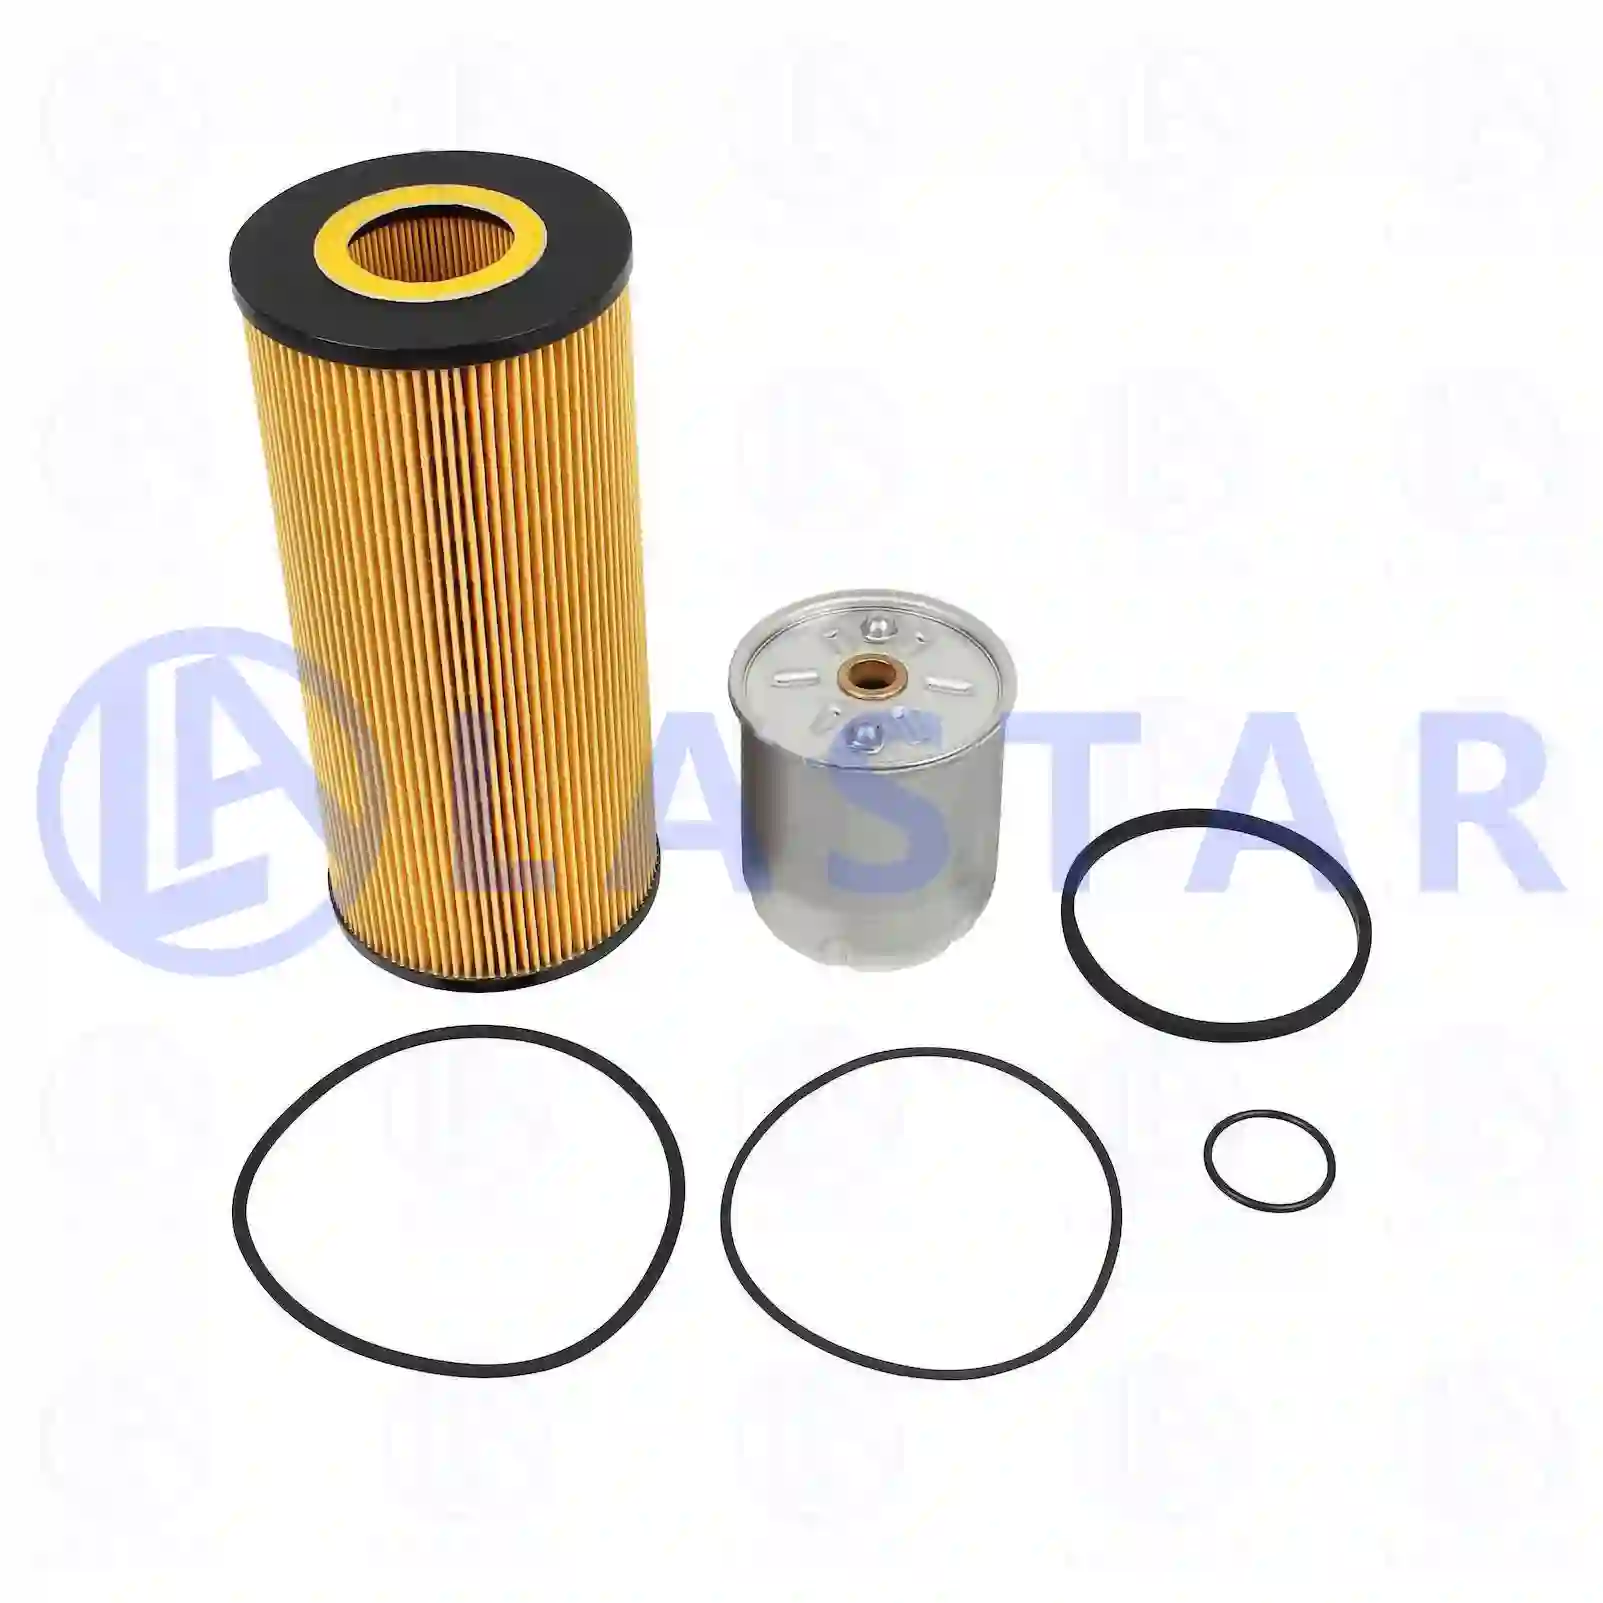 Oil filter kit, for biodiesel-engines, 77702030, 5411800109, 5411840525, 7424993650, ZG01750-0008 ||  77702030 Lastar Spare Part | Truck Spare Parts, Auotomotive Spare Parts Oil filter kit, for biodiesel-engines, 77702030, 5411800109, 5411840525, 7424993650, ZG01750-0008 ||  77702030 Lastar Spare Part | Truck Spare Parts, Auotomotive Spare Parts